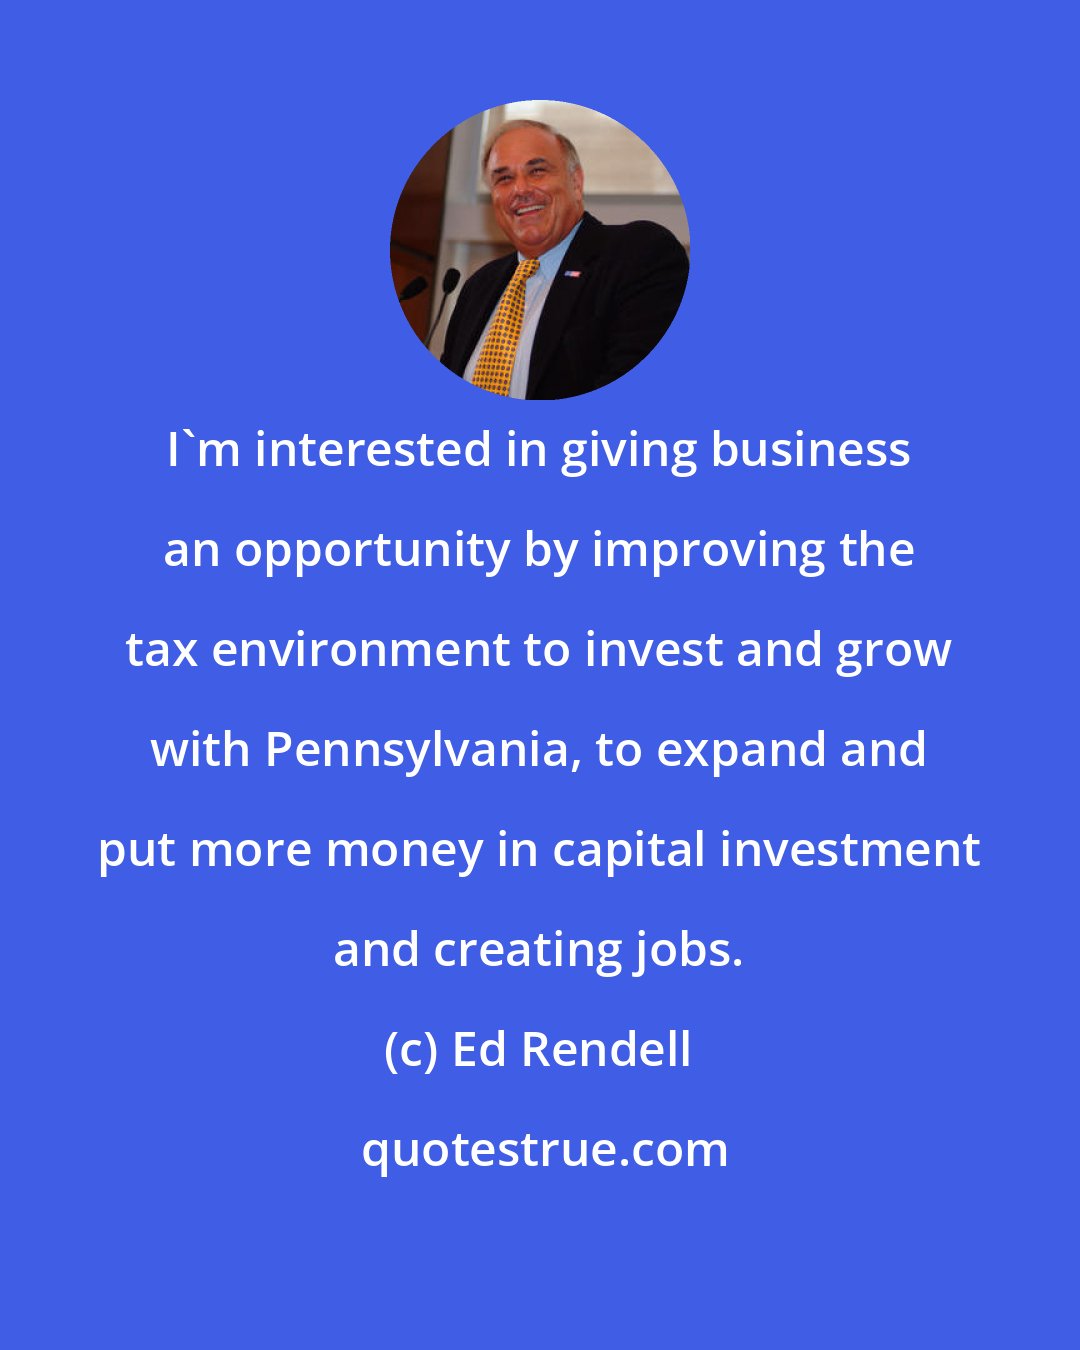 Ed Rendell: I'm interested in giving business an opportunity by improving the tax environment to invest and grow with Pennsylvania, to expand and put more money in capital investment and creating jobs.